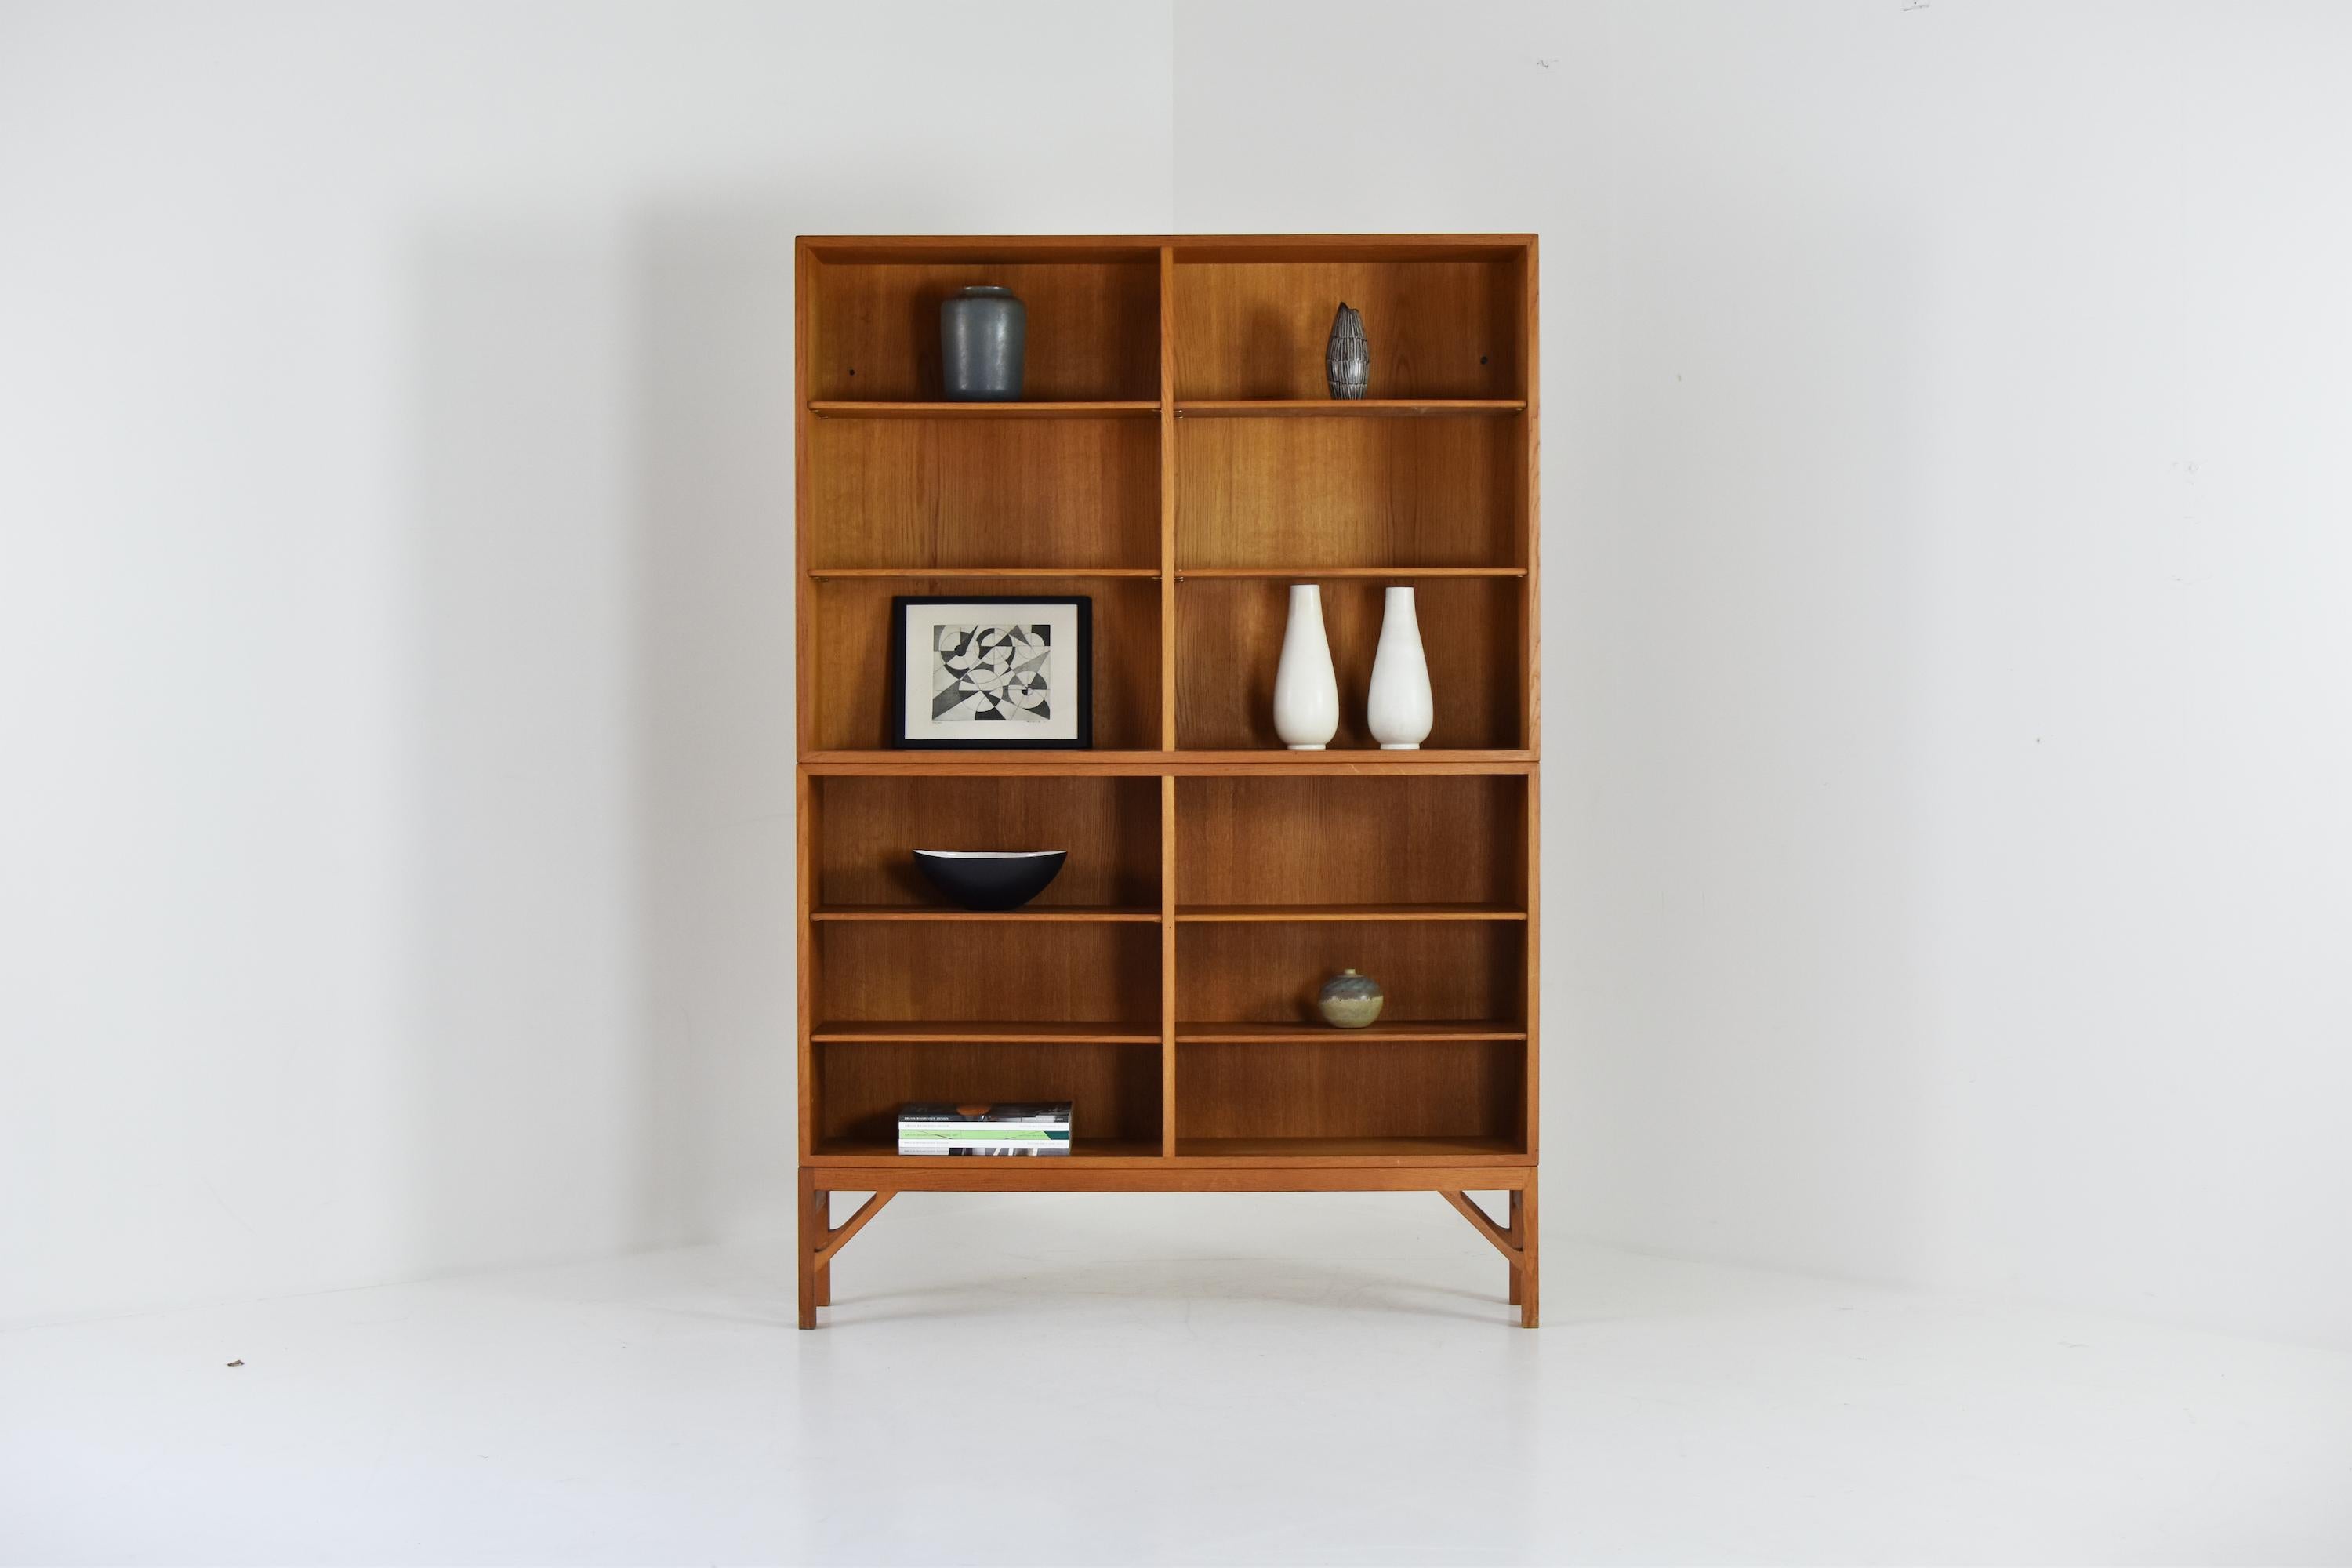 Rare version of this open bookshelf by Borge Mogensen for FDB Møbler, Denmark 1960s. This cabinet features the original oak frame and includes 8 adjustable shelves. Comes in two parts. Classic Danish Modern in a good, well presented condition.